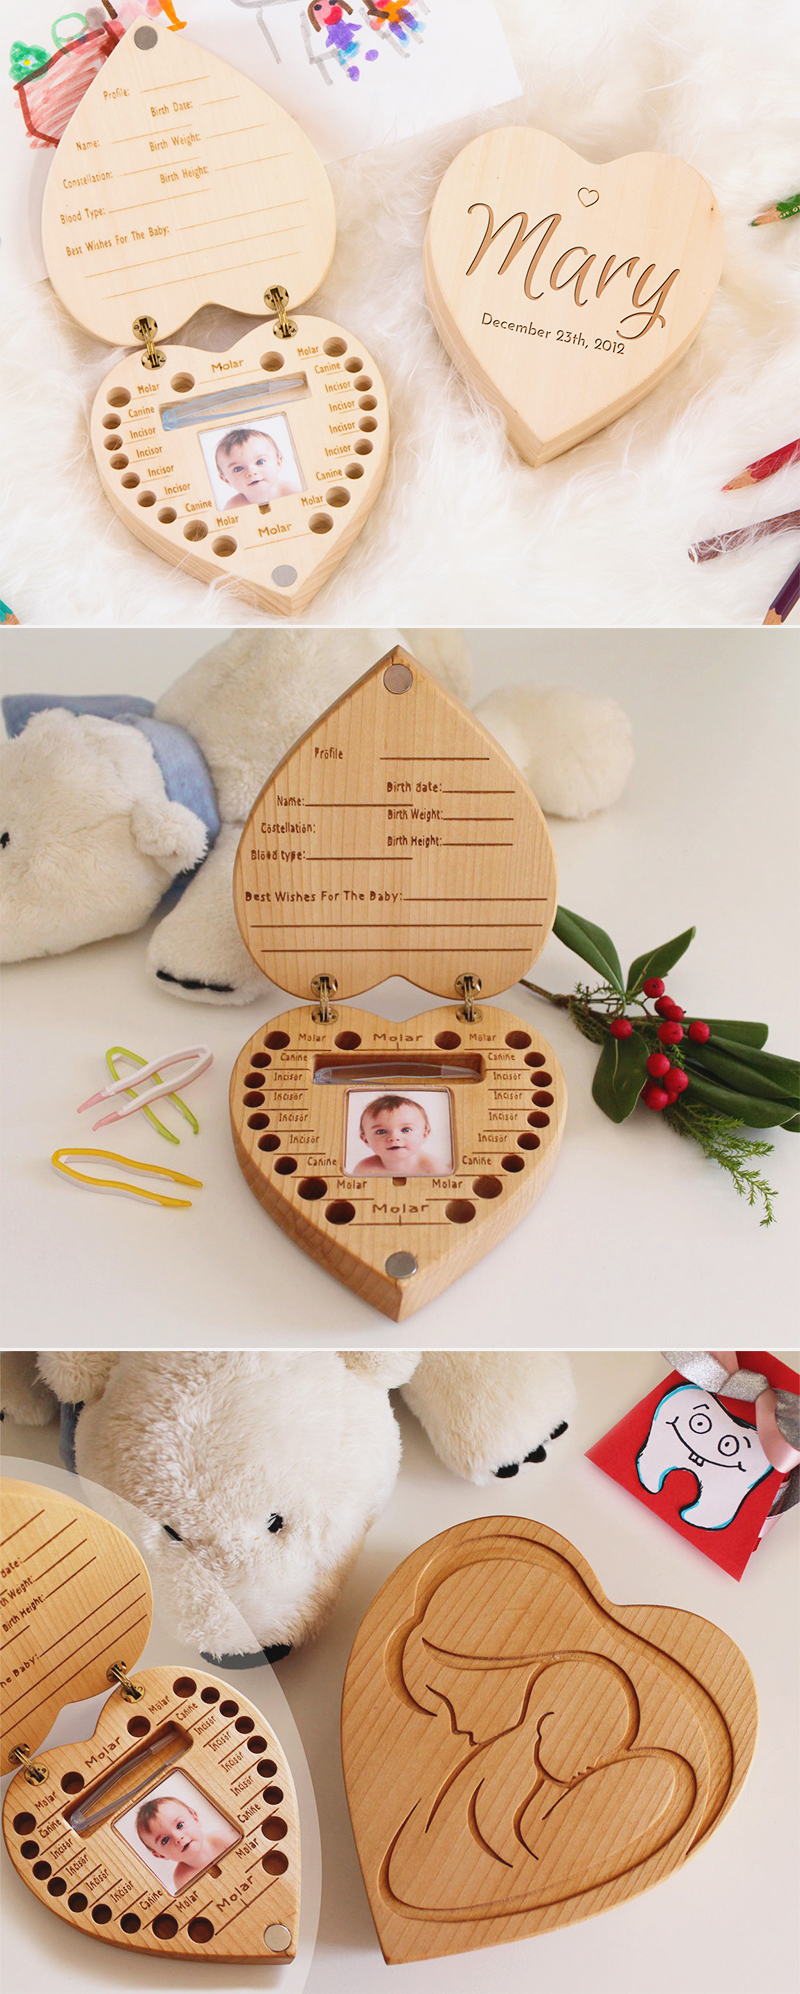 22 Meaningful Gifts For New Parents and Babies! - Praise Wedding